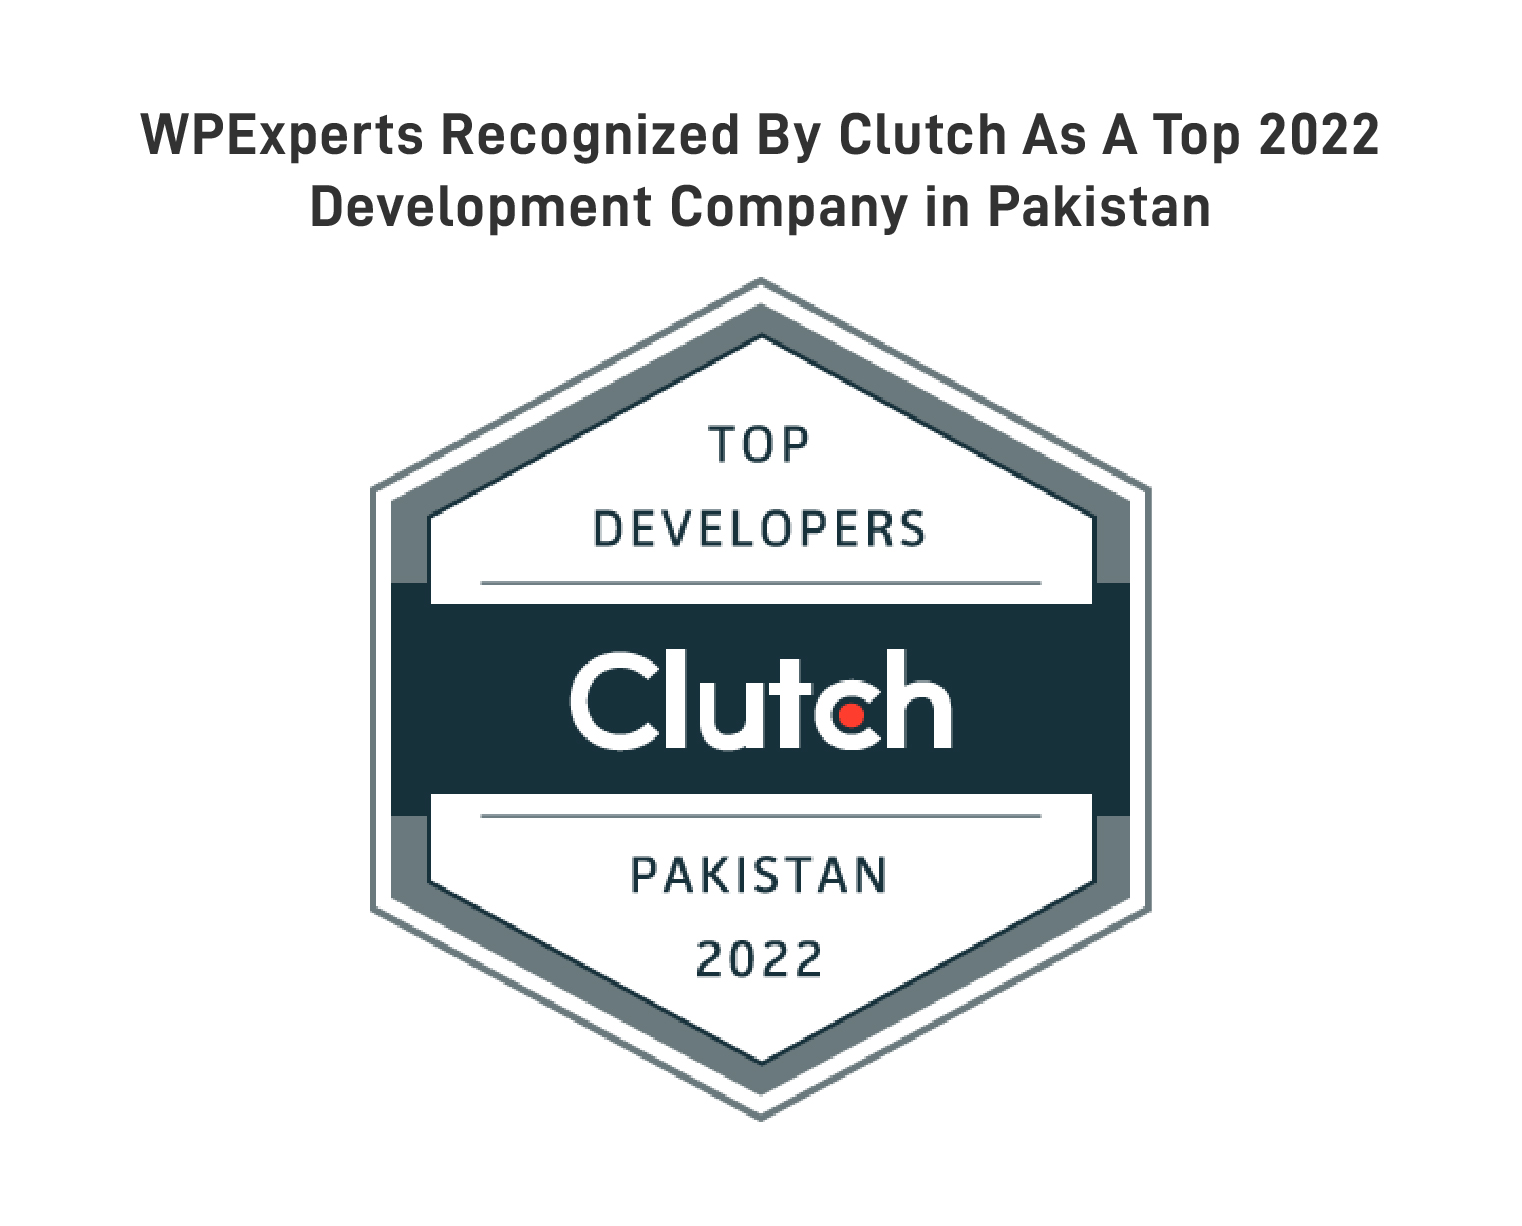 WPExperts Recognized by Clutch as a Top Development Company in Pakistan For 2022